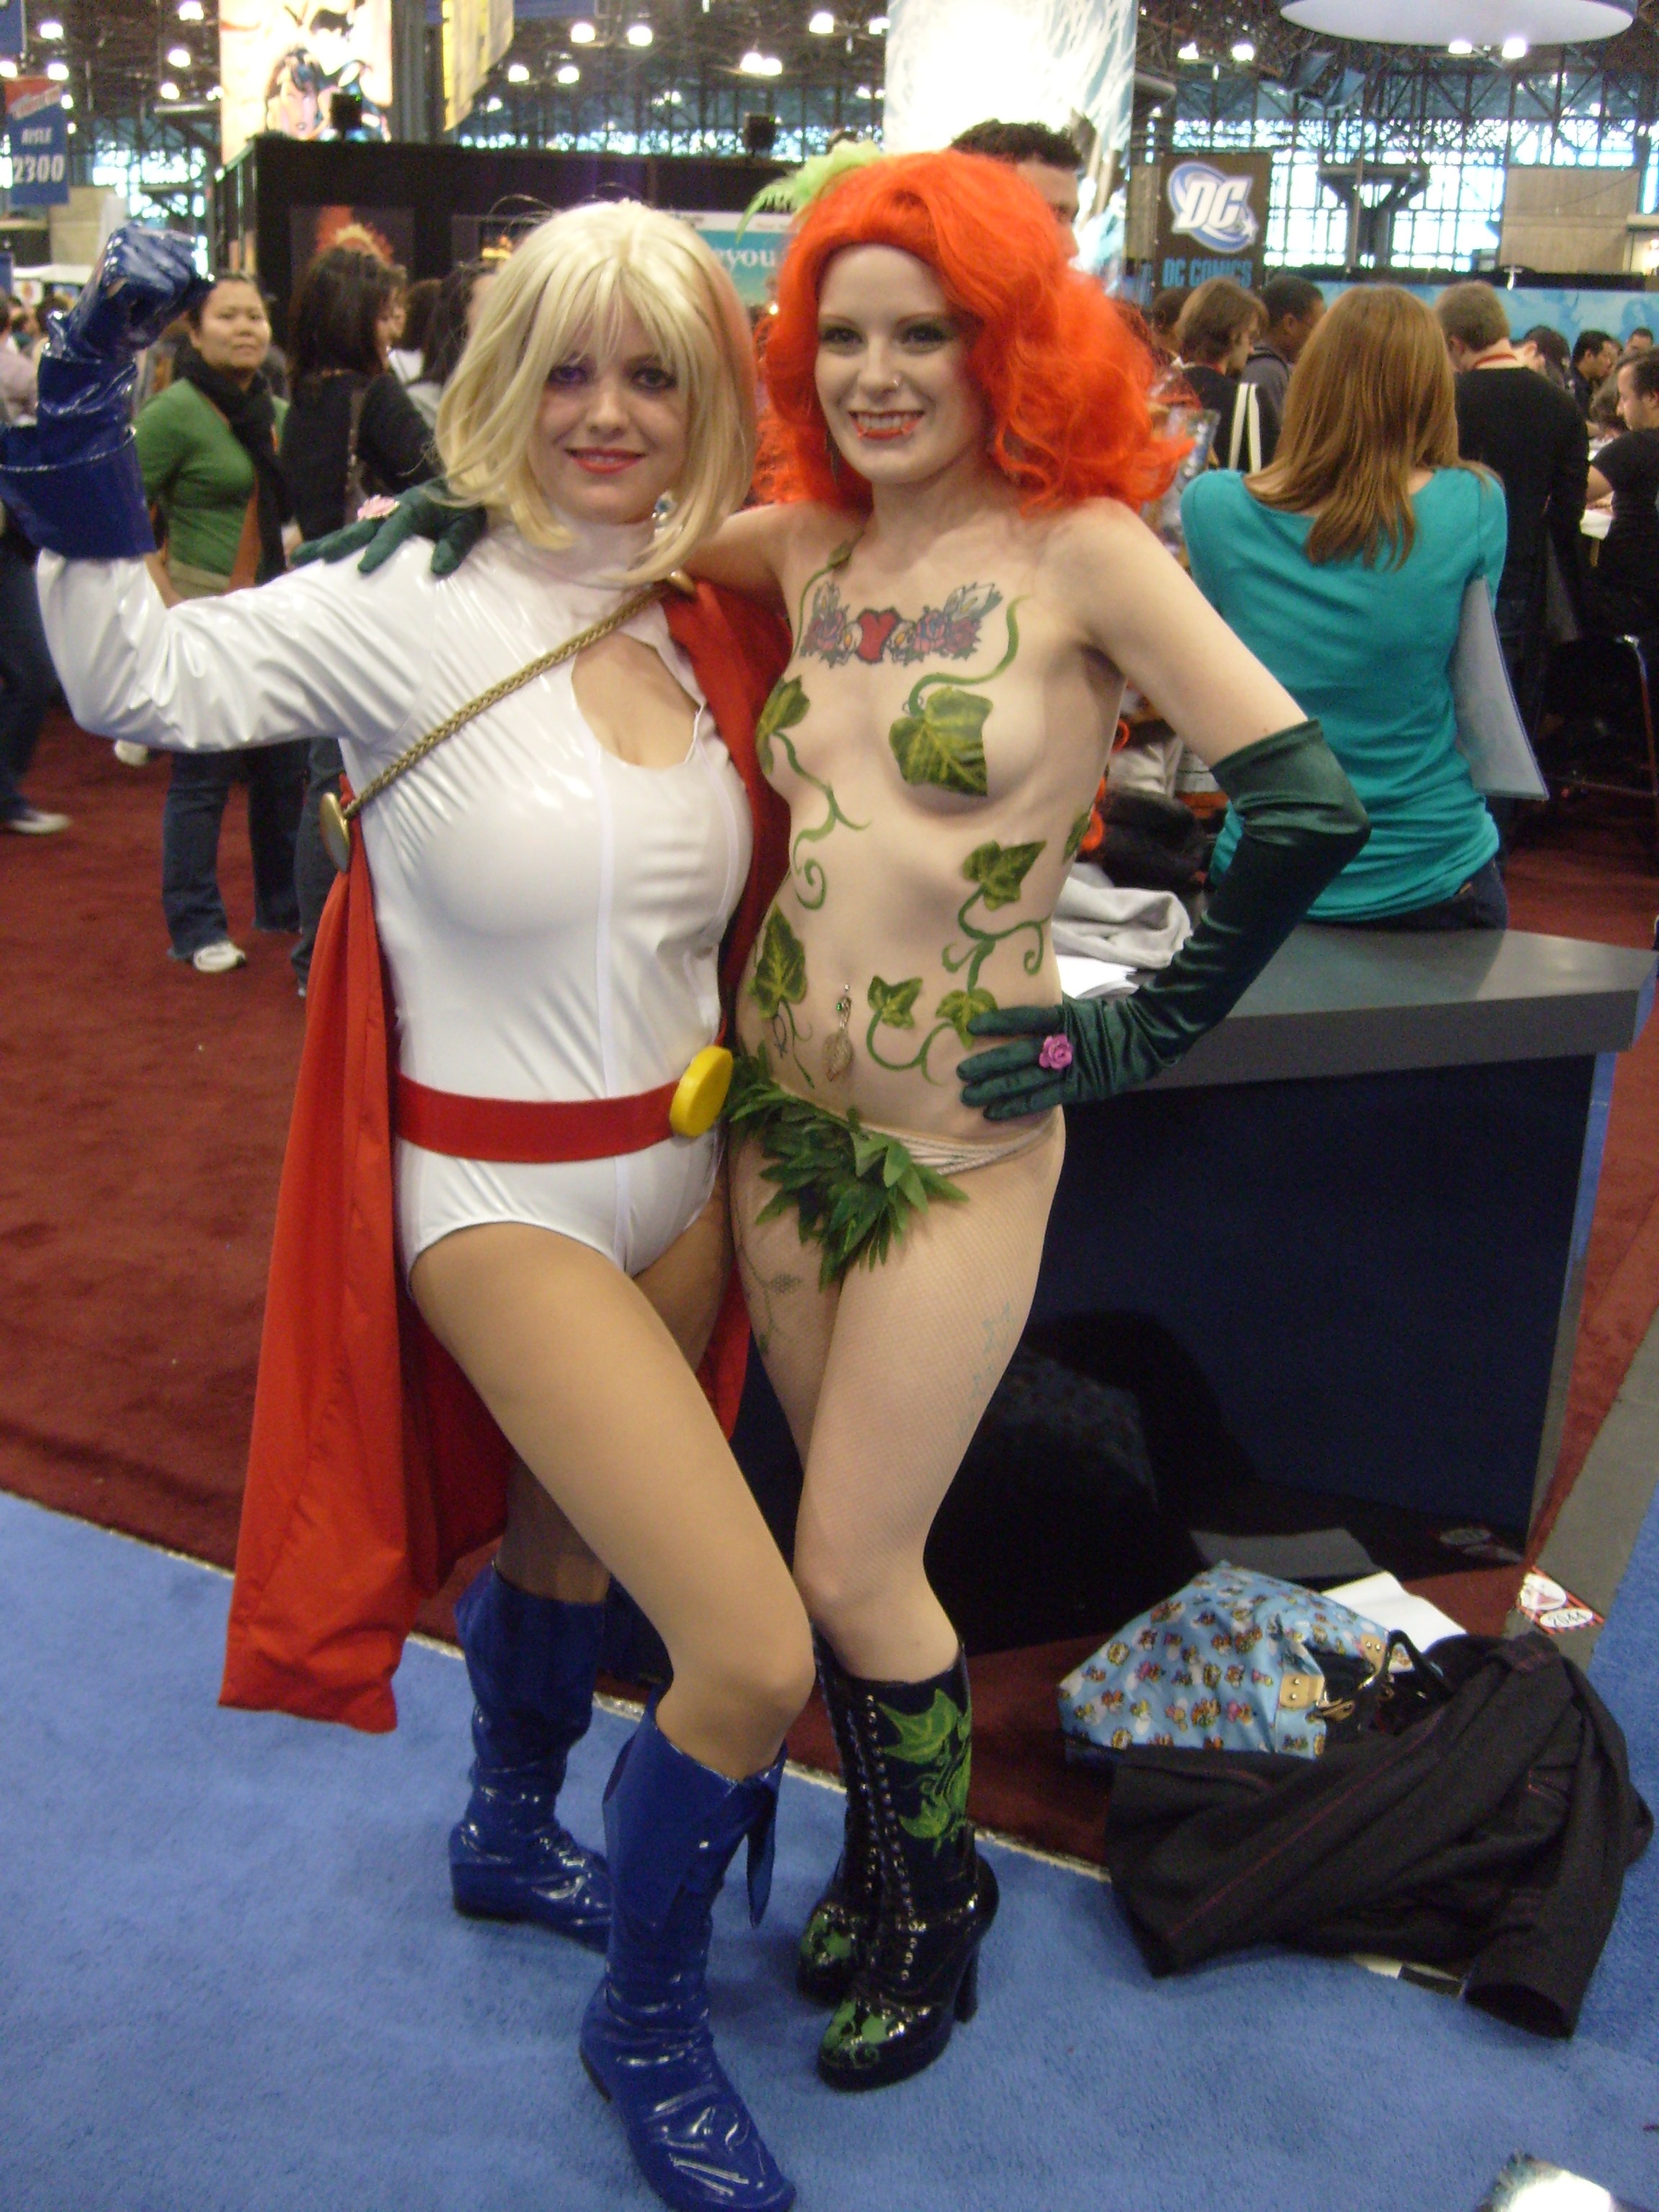 Naked Cosplay When Will Con Organizers Draw The Line Not Quite